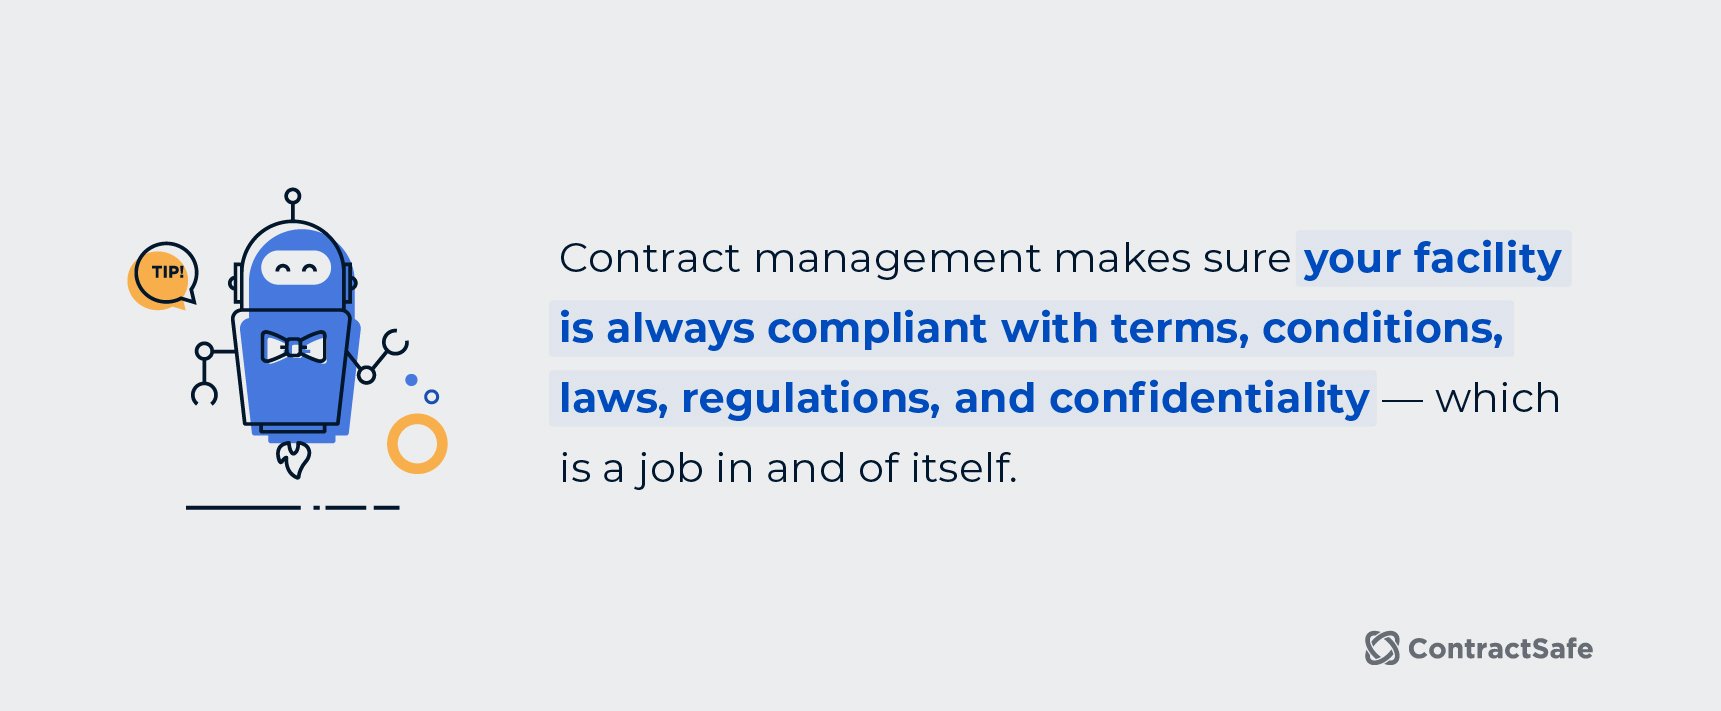 Contract management makes sure your facility is always compliant with terms, conditions, laws, regulations, and confidentiality - which is a job in and of itself. 